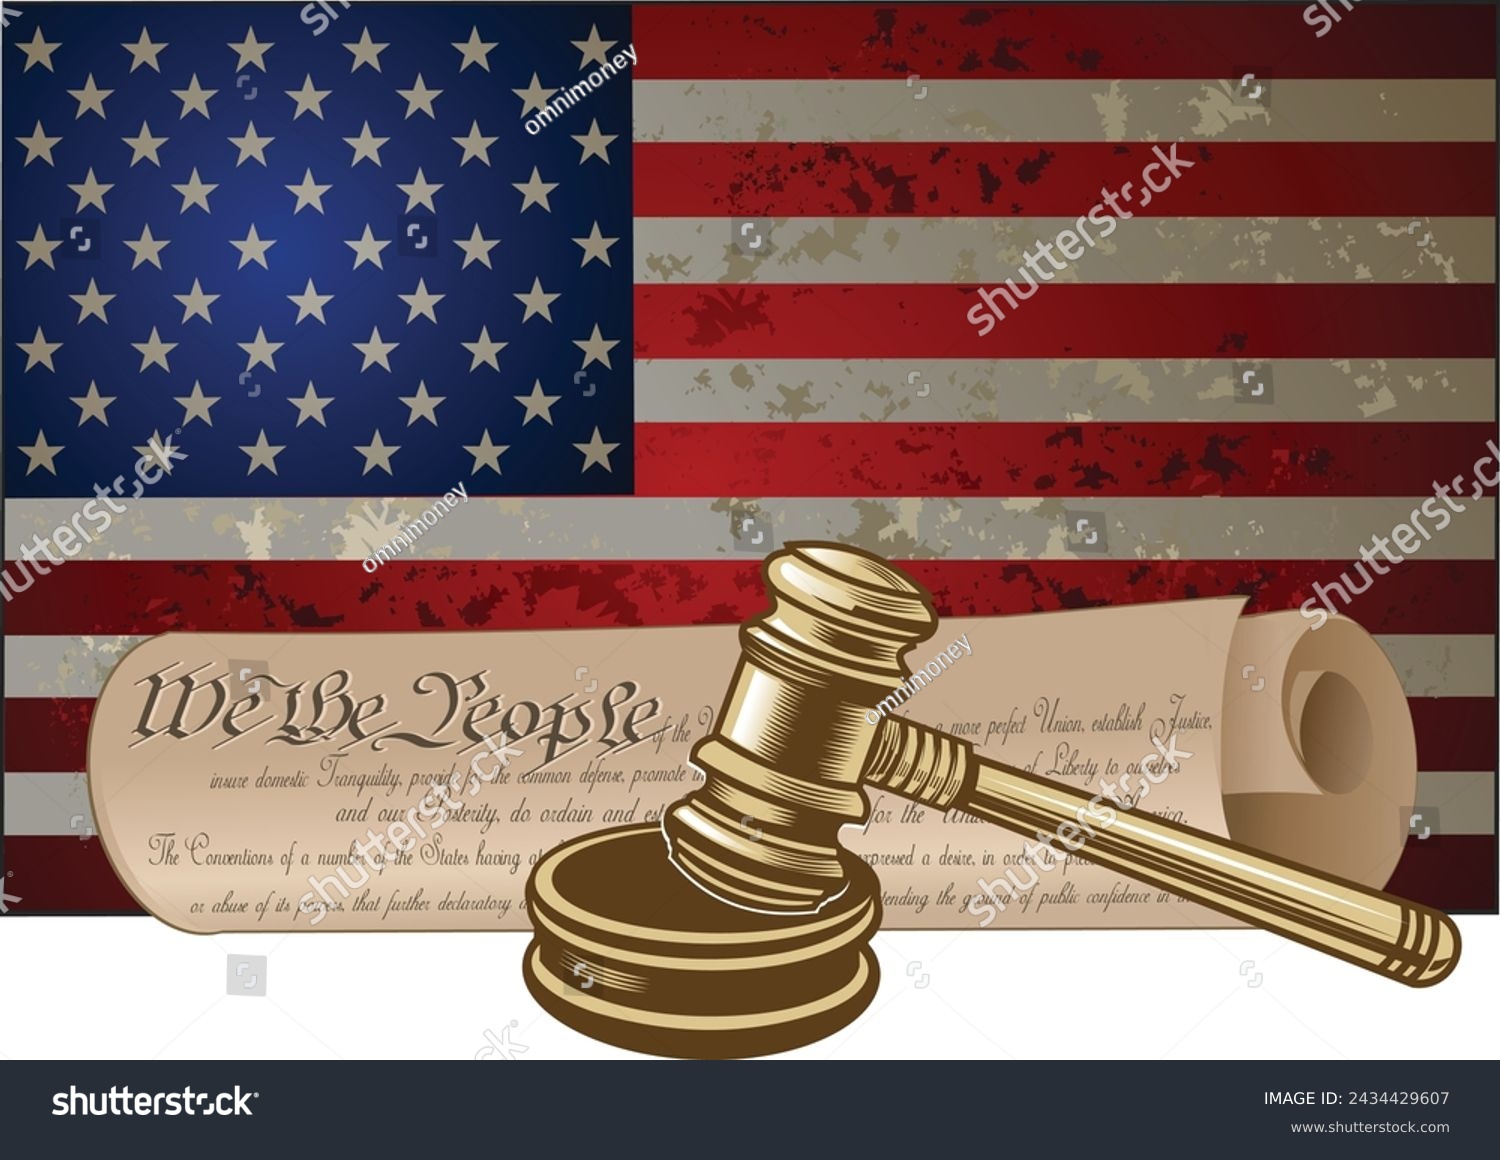 SVG of Gavel and American flag with Bill of Rights svg